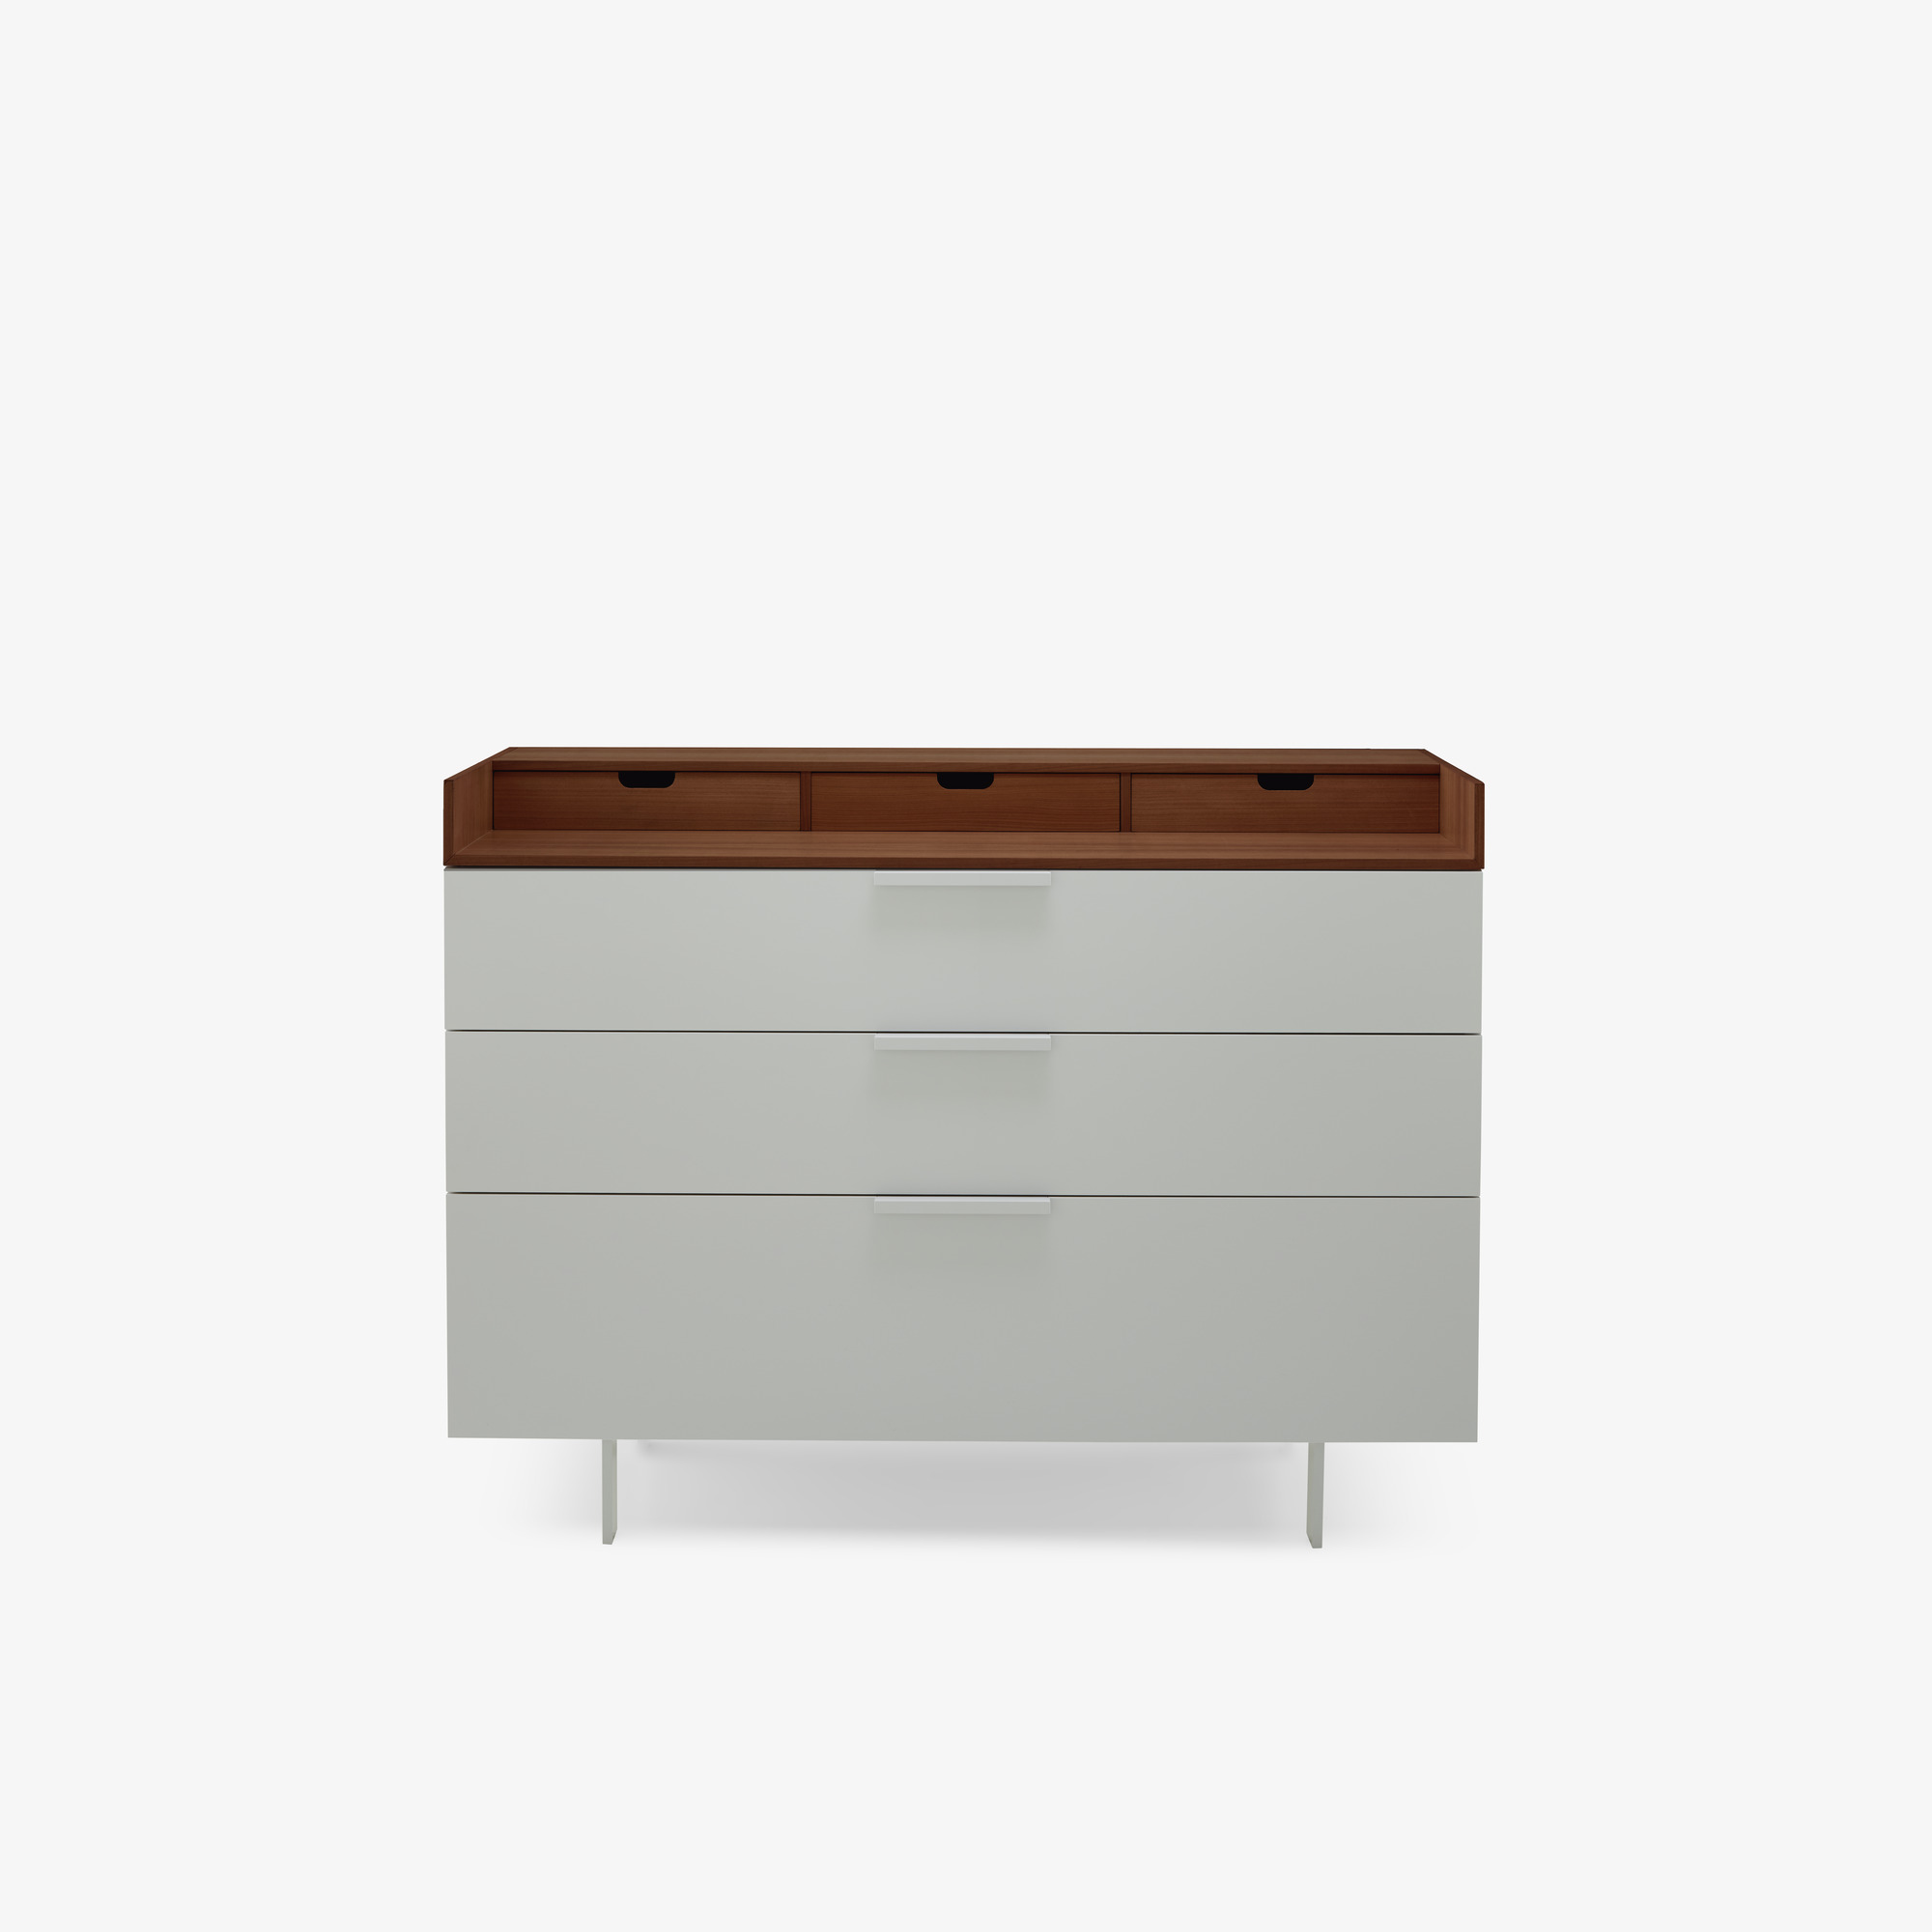 Image 3 DRAWER CHEST C 26E WITH TOP WITH COMPARTMENTS + 3 DRAWERS